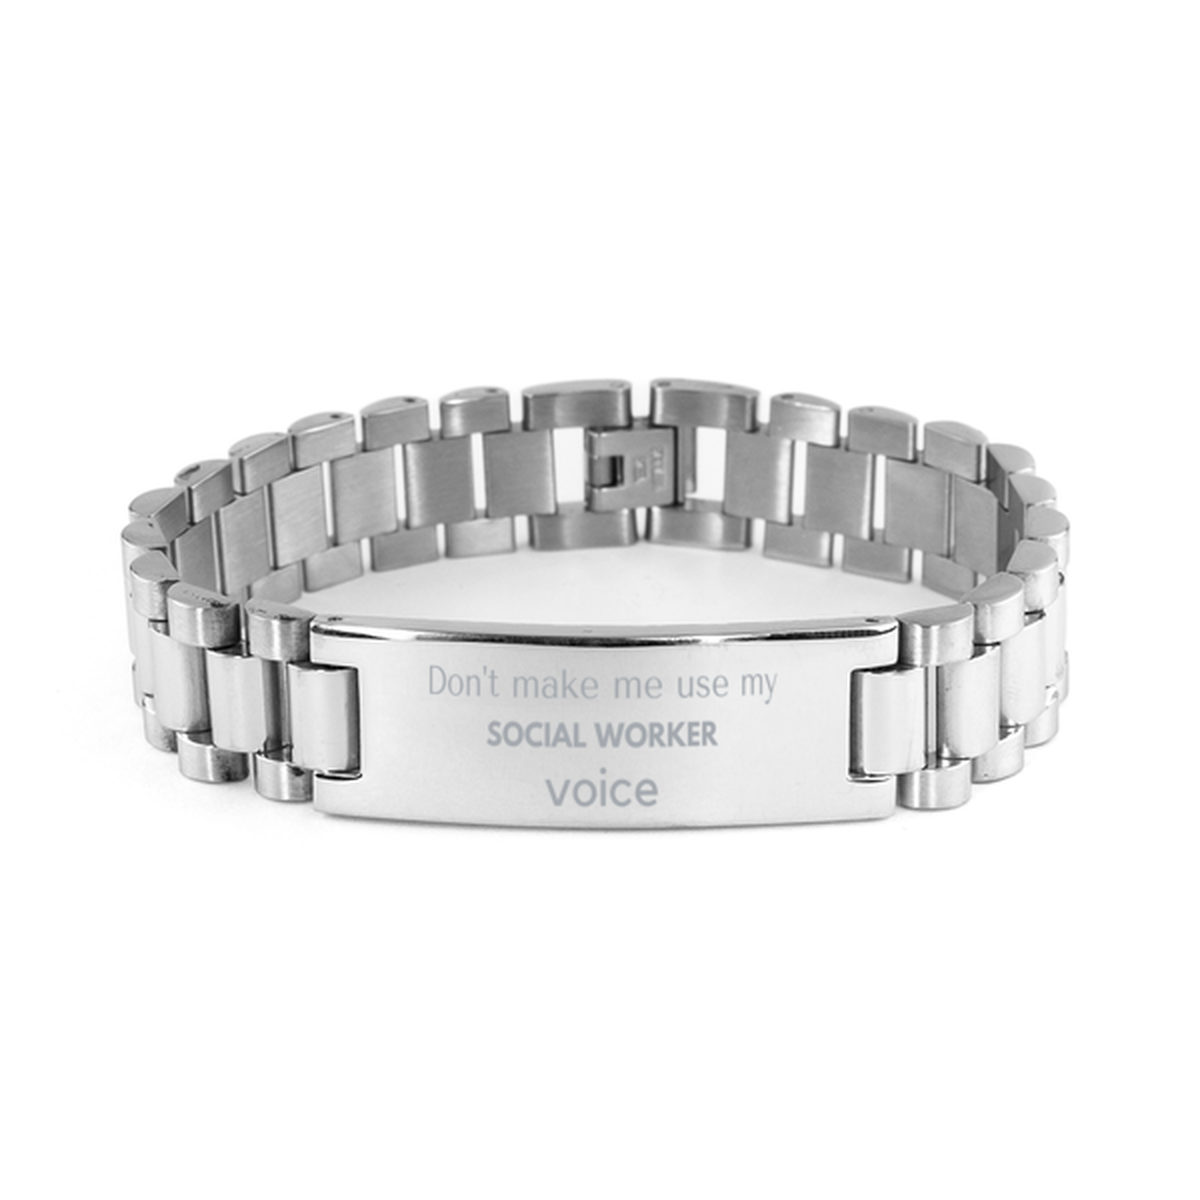 Don't make me use my Social Worker voice, Sarcasm Social Worker Gifts, Christmas Social Worker Ladder Stainless Steel Bracelet Birthday Unique Gifts For Social Worker Coworkers, Men, Women, Colleague, Friends